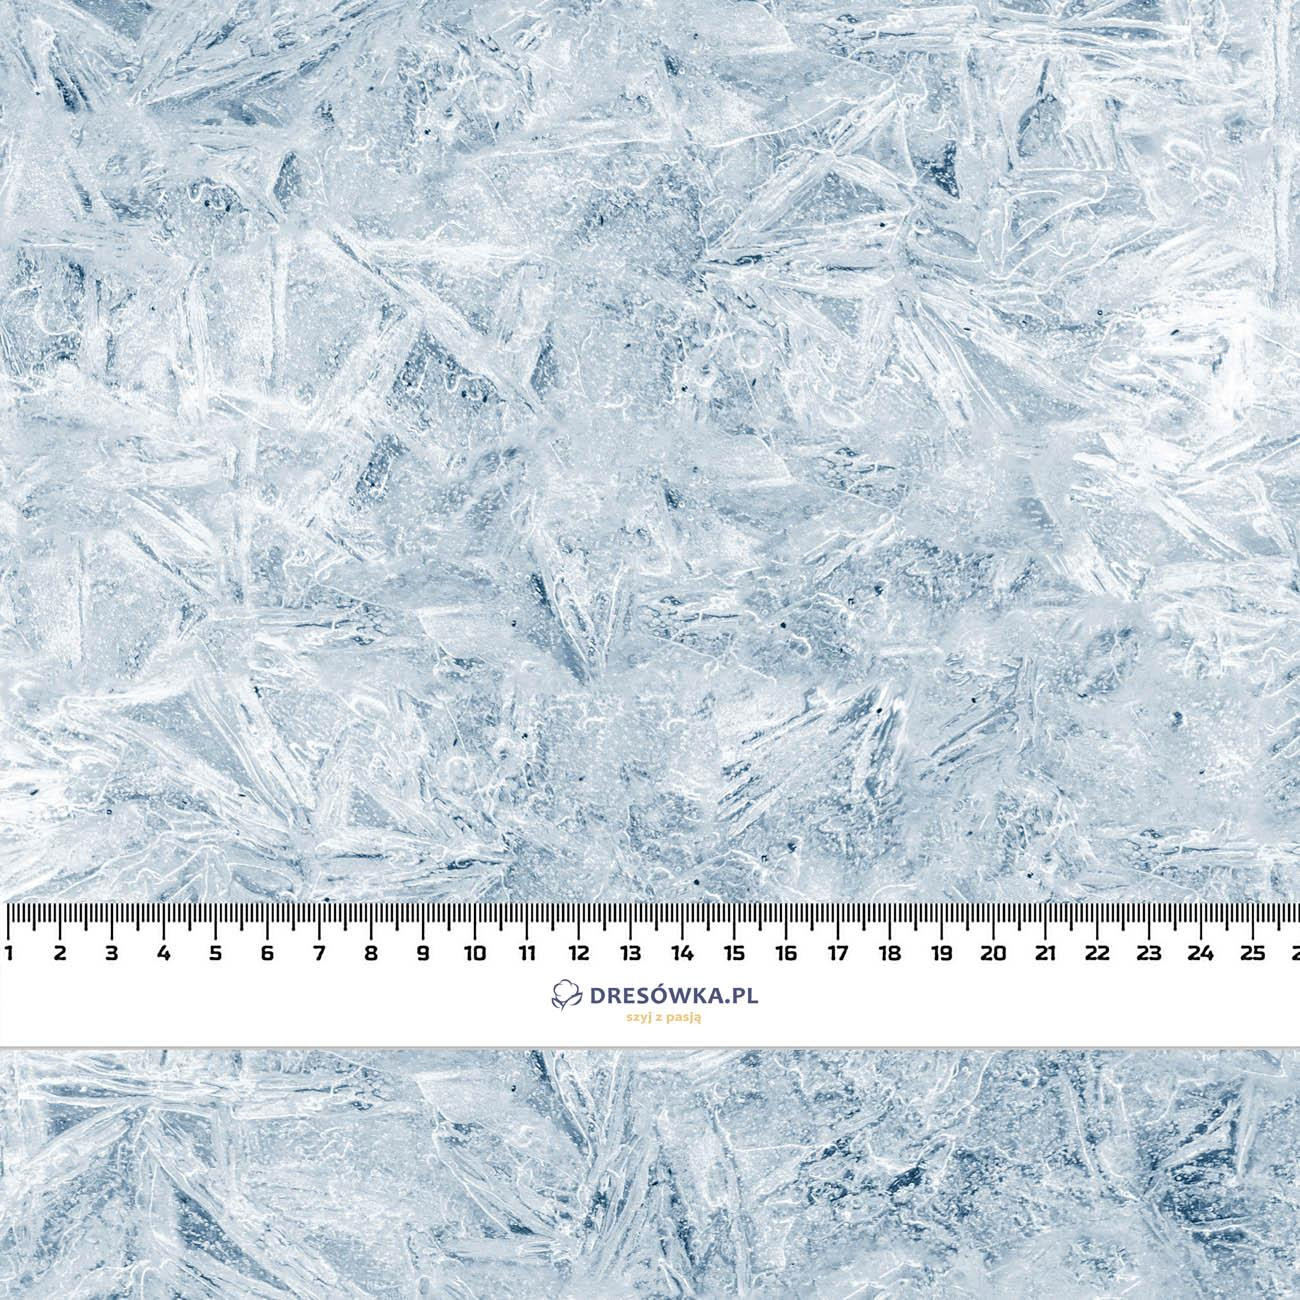 FROST pat. 2 / light blue (PAINTED ON GLASS) - Cotton woven fabric